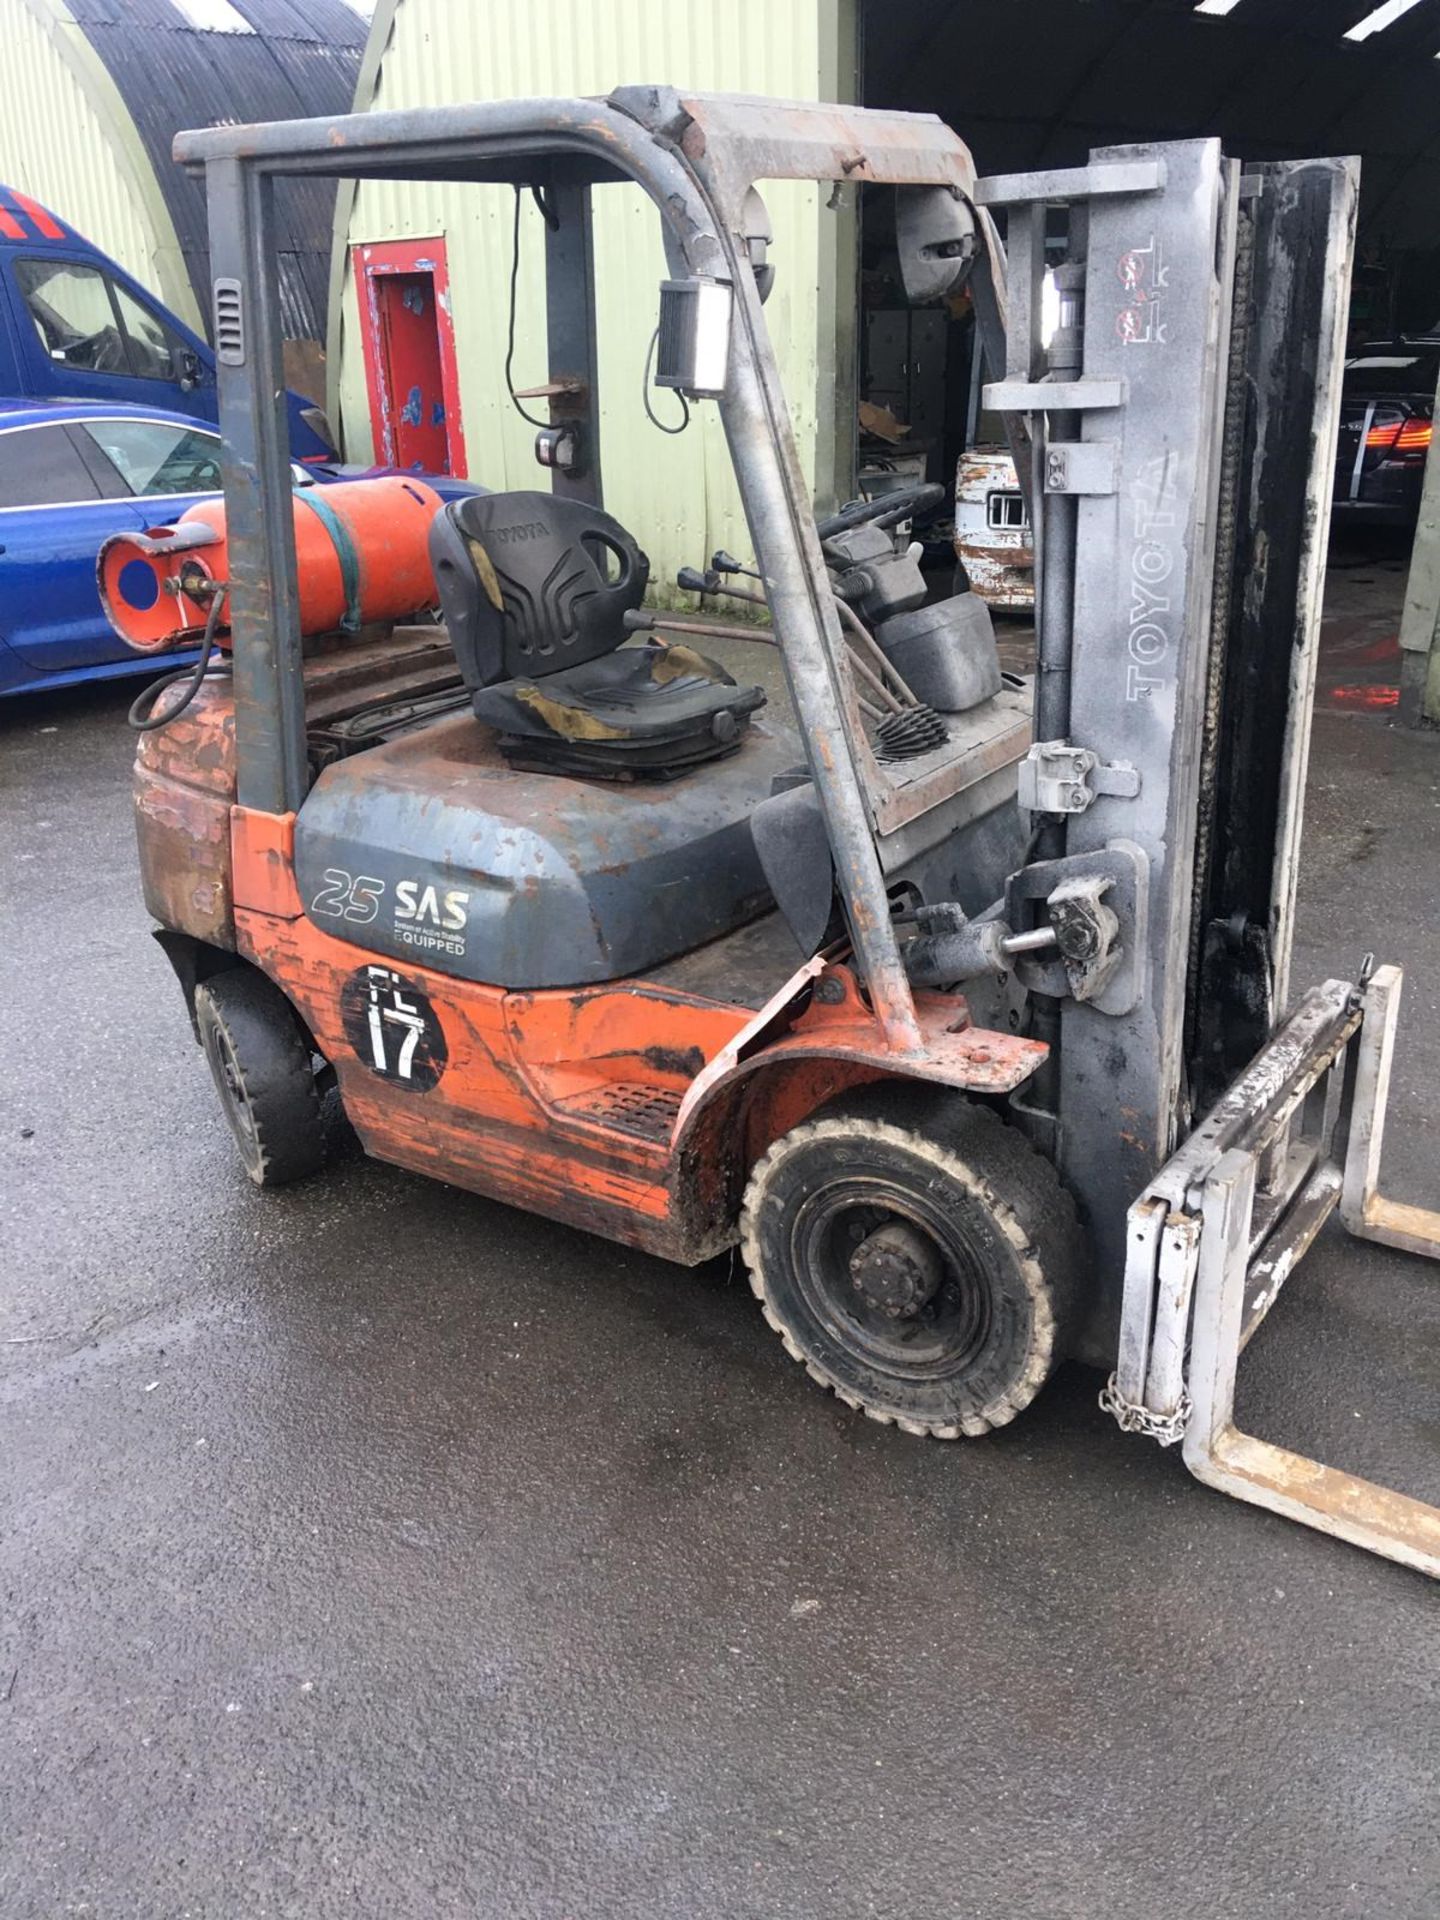 TOYOTA 25 GAS POWERED FORKLIFT, RUNS, WORKS AND LIFTS *NO VAT* - Image 2 of 12